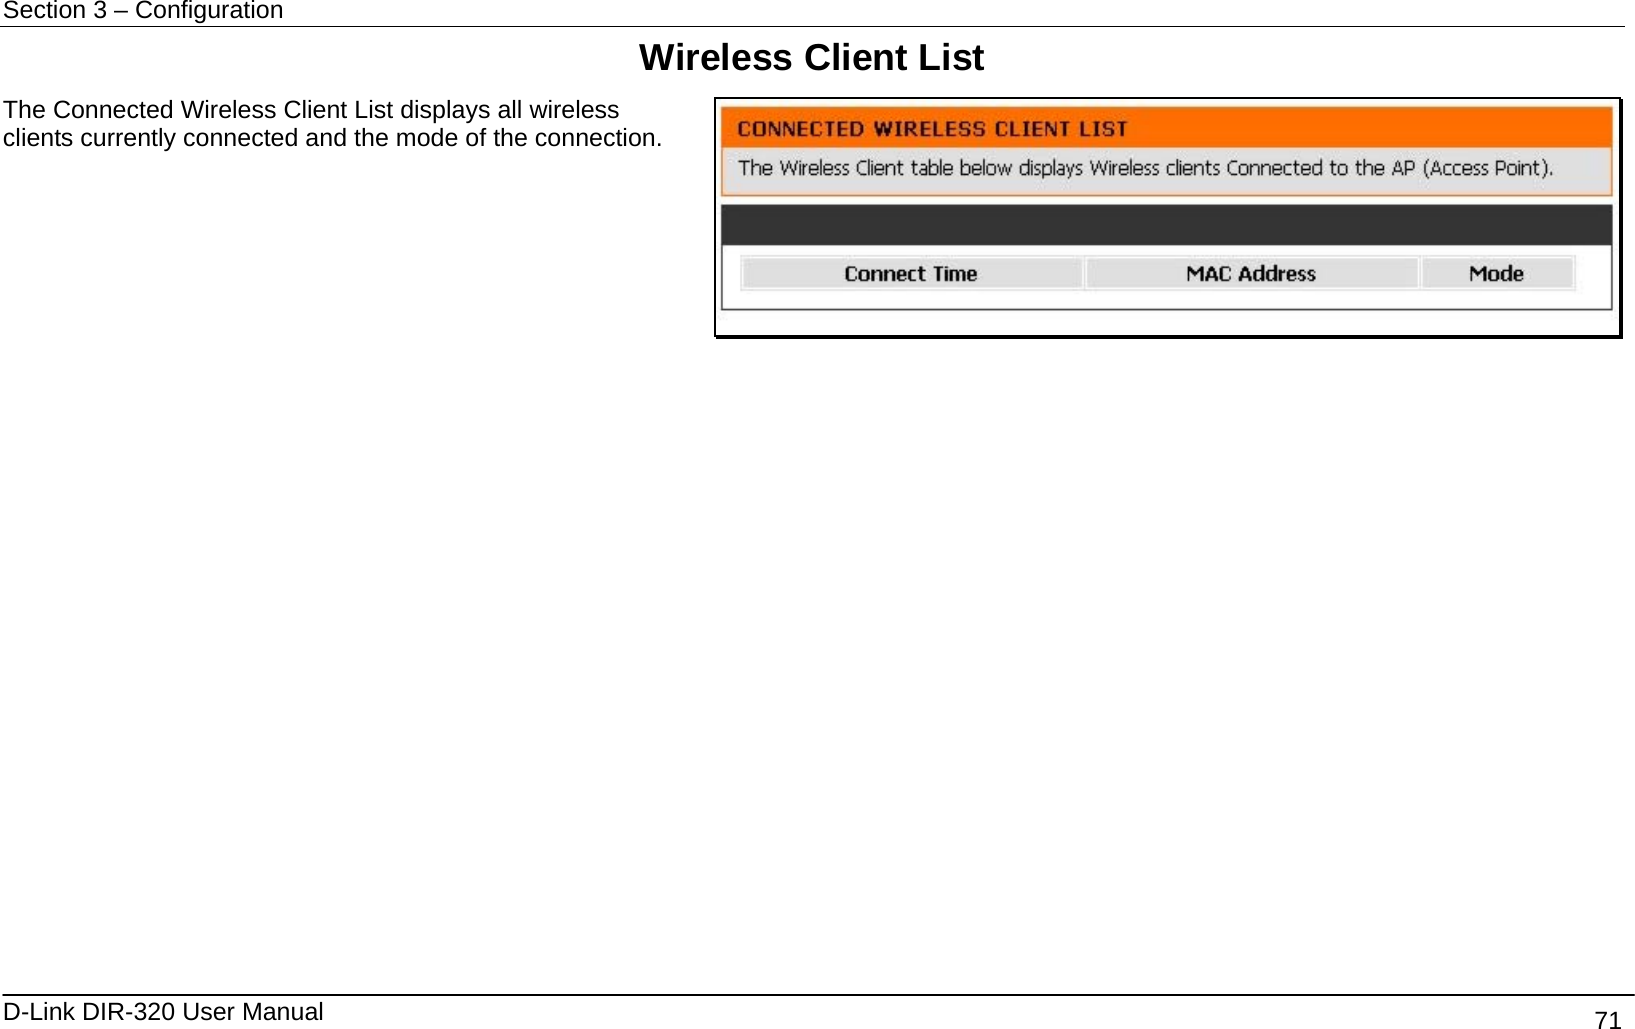 Section 3 – Configuration   D-Link DIR-320 User Manual                                       71 Wireless Client List The Connected Wireless Client List displays all wireless clients currently connected and the mode of the connection.                     